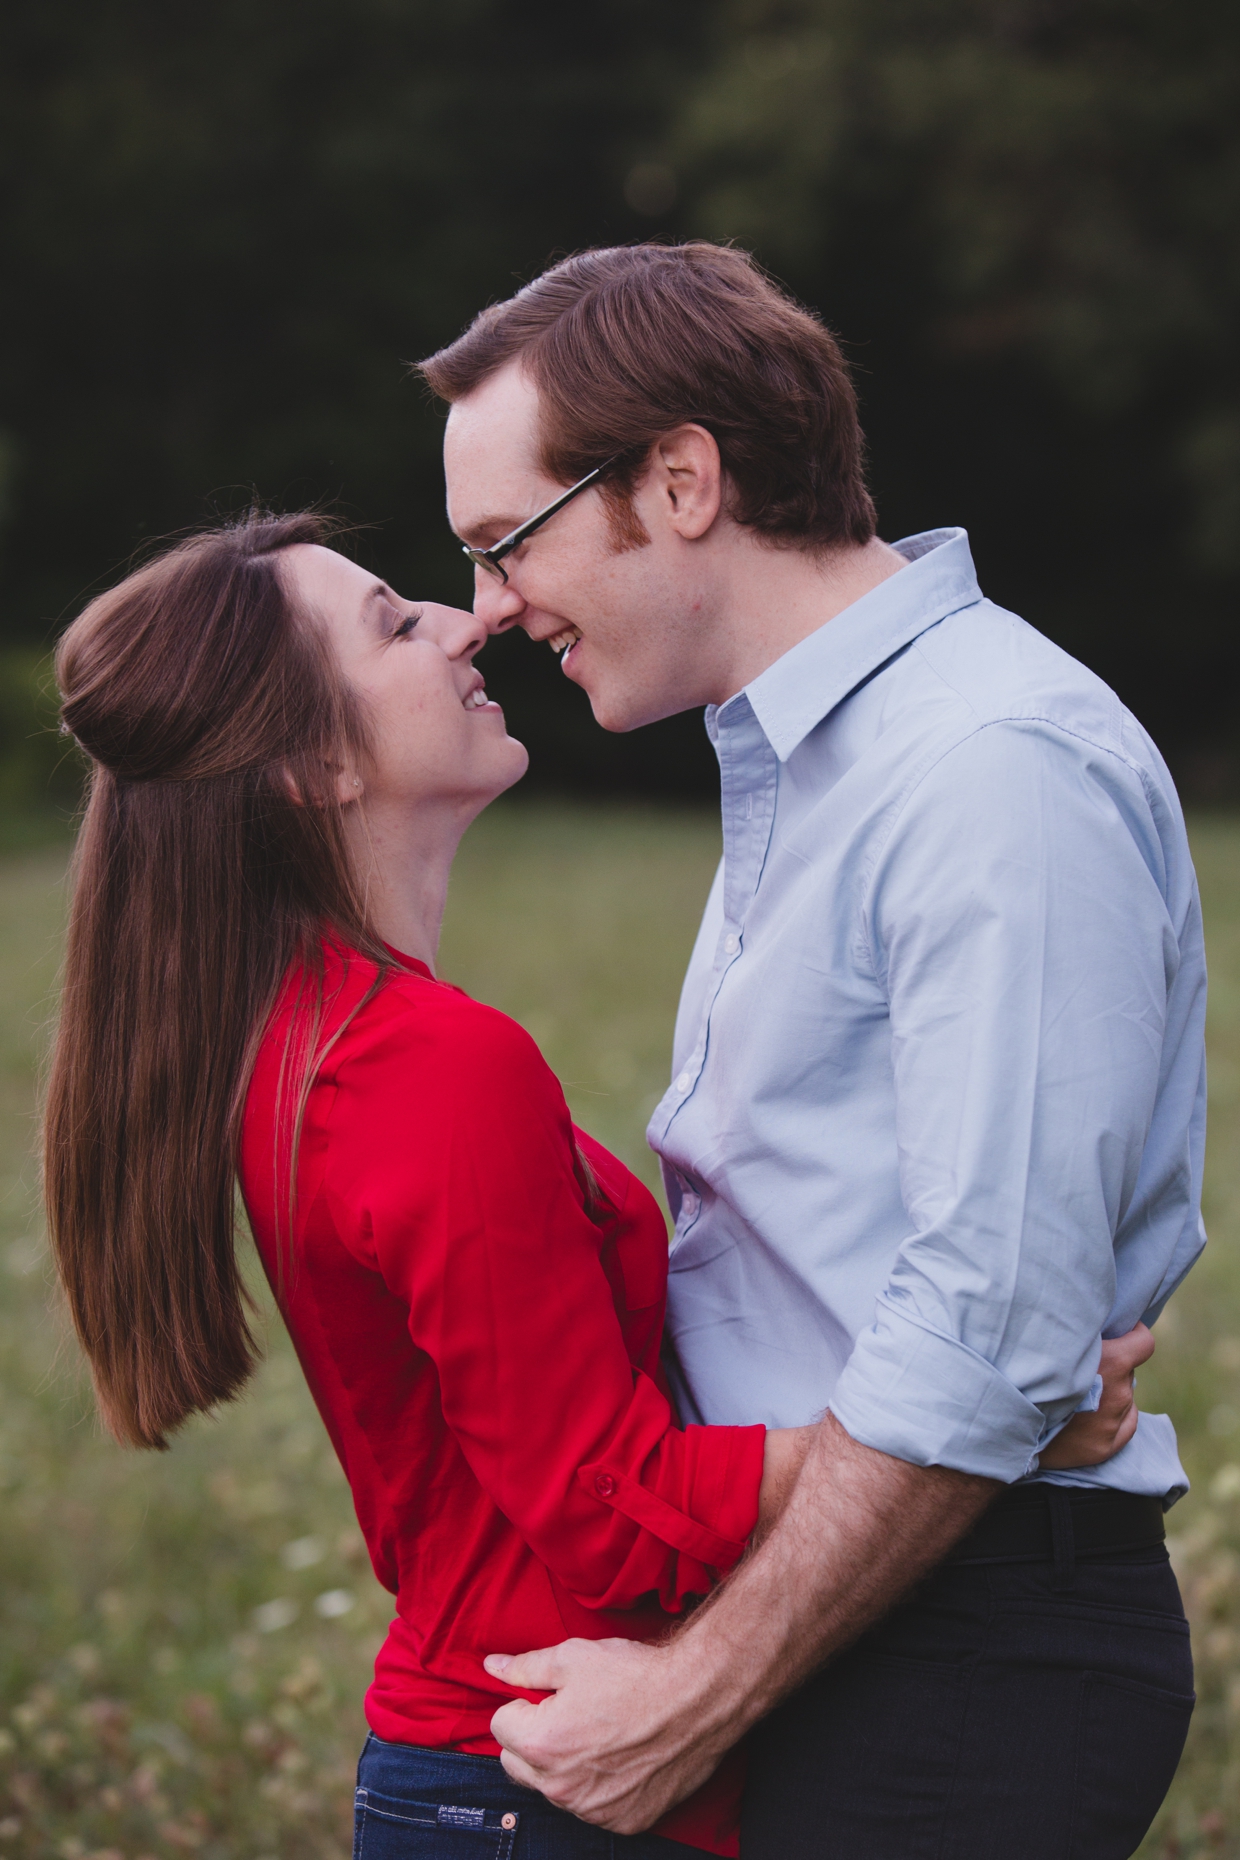 A sweet portrait of a couple rubbing noses during their engagement session at Boston's Arnold Arboretum